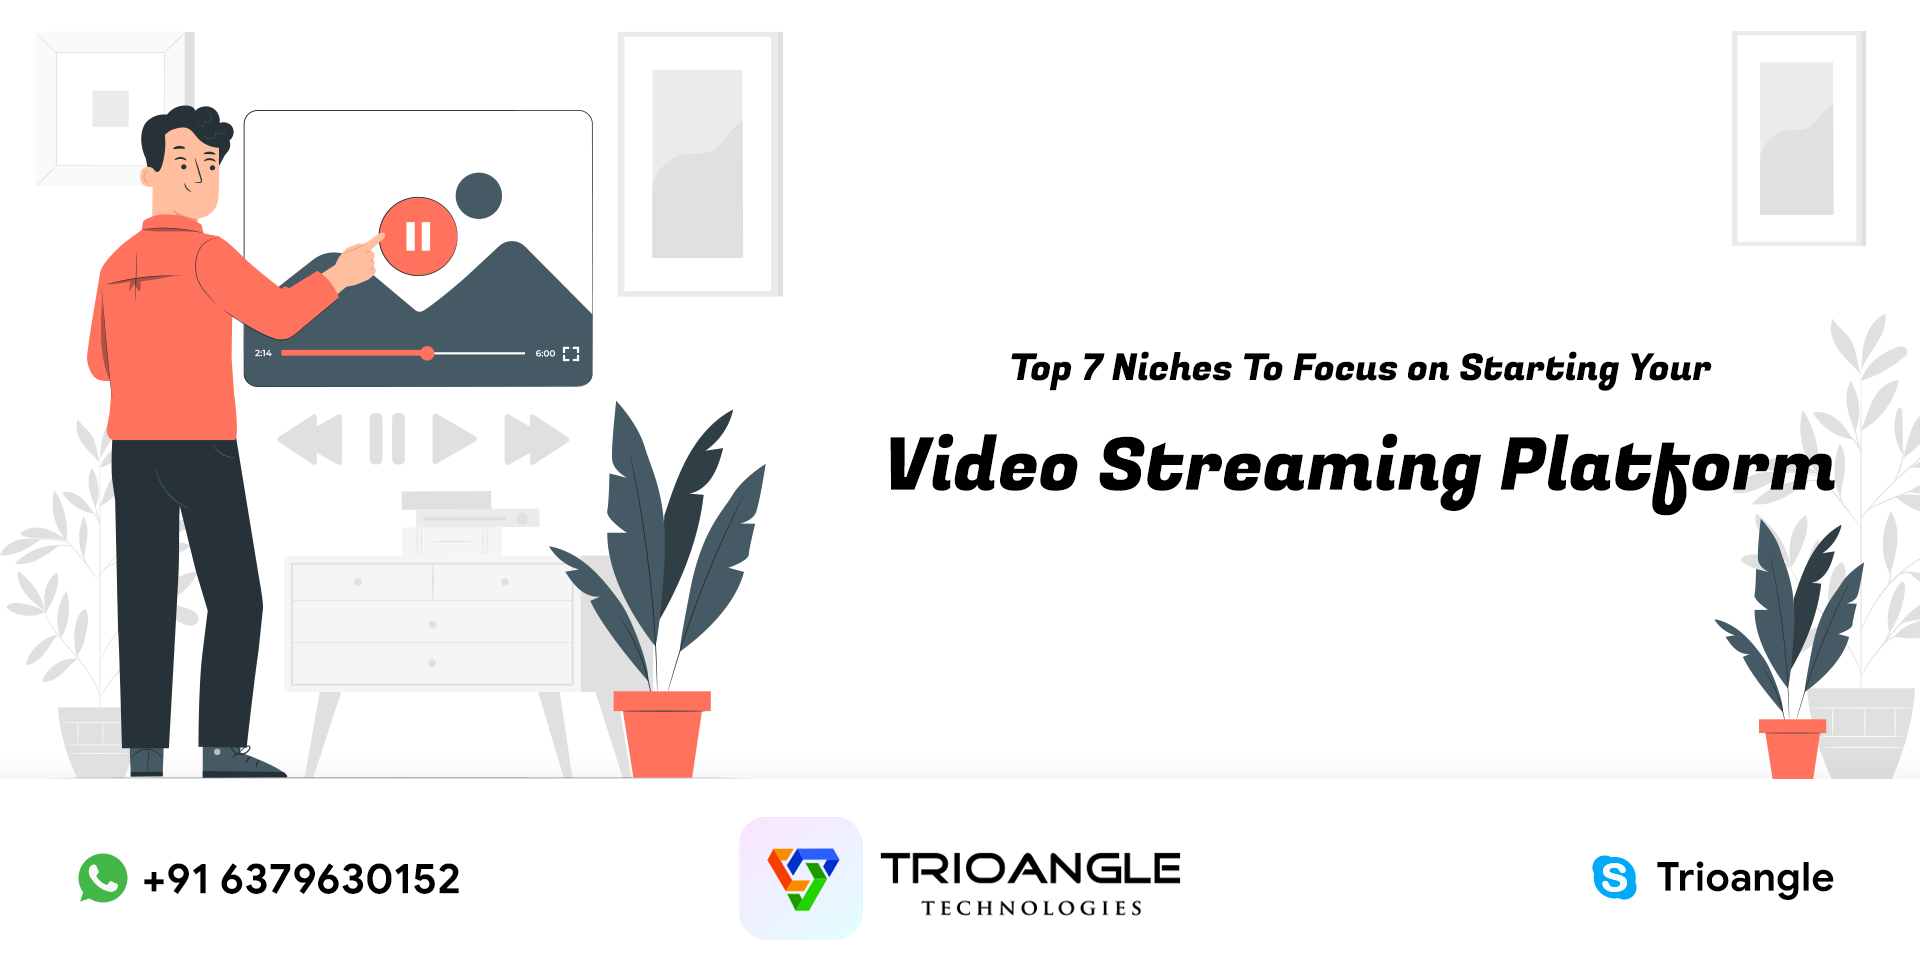 Top 7 Niches To Focus on Starting Your Video Streaming Platform